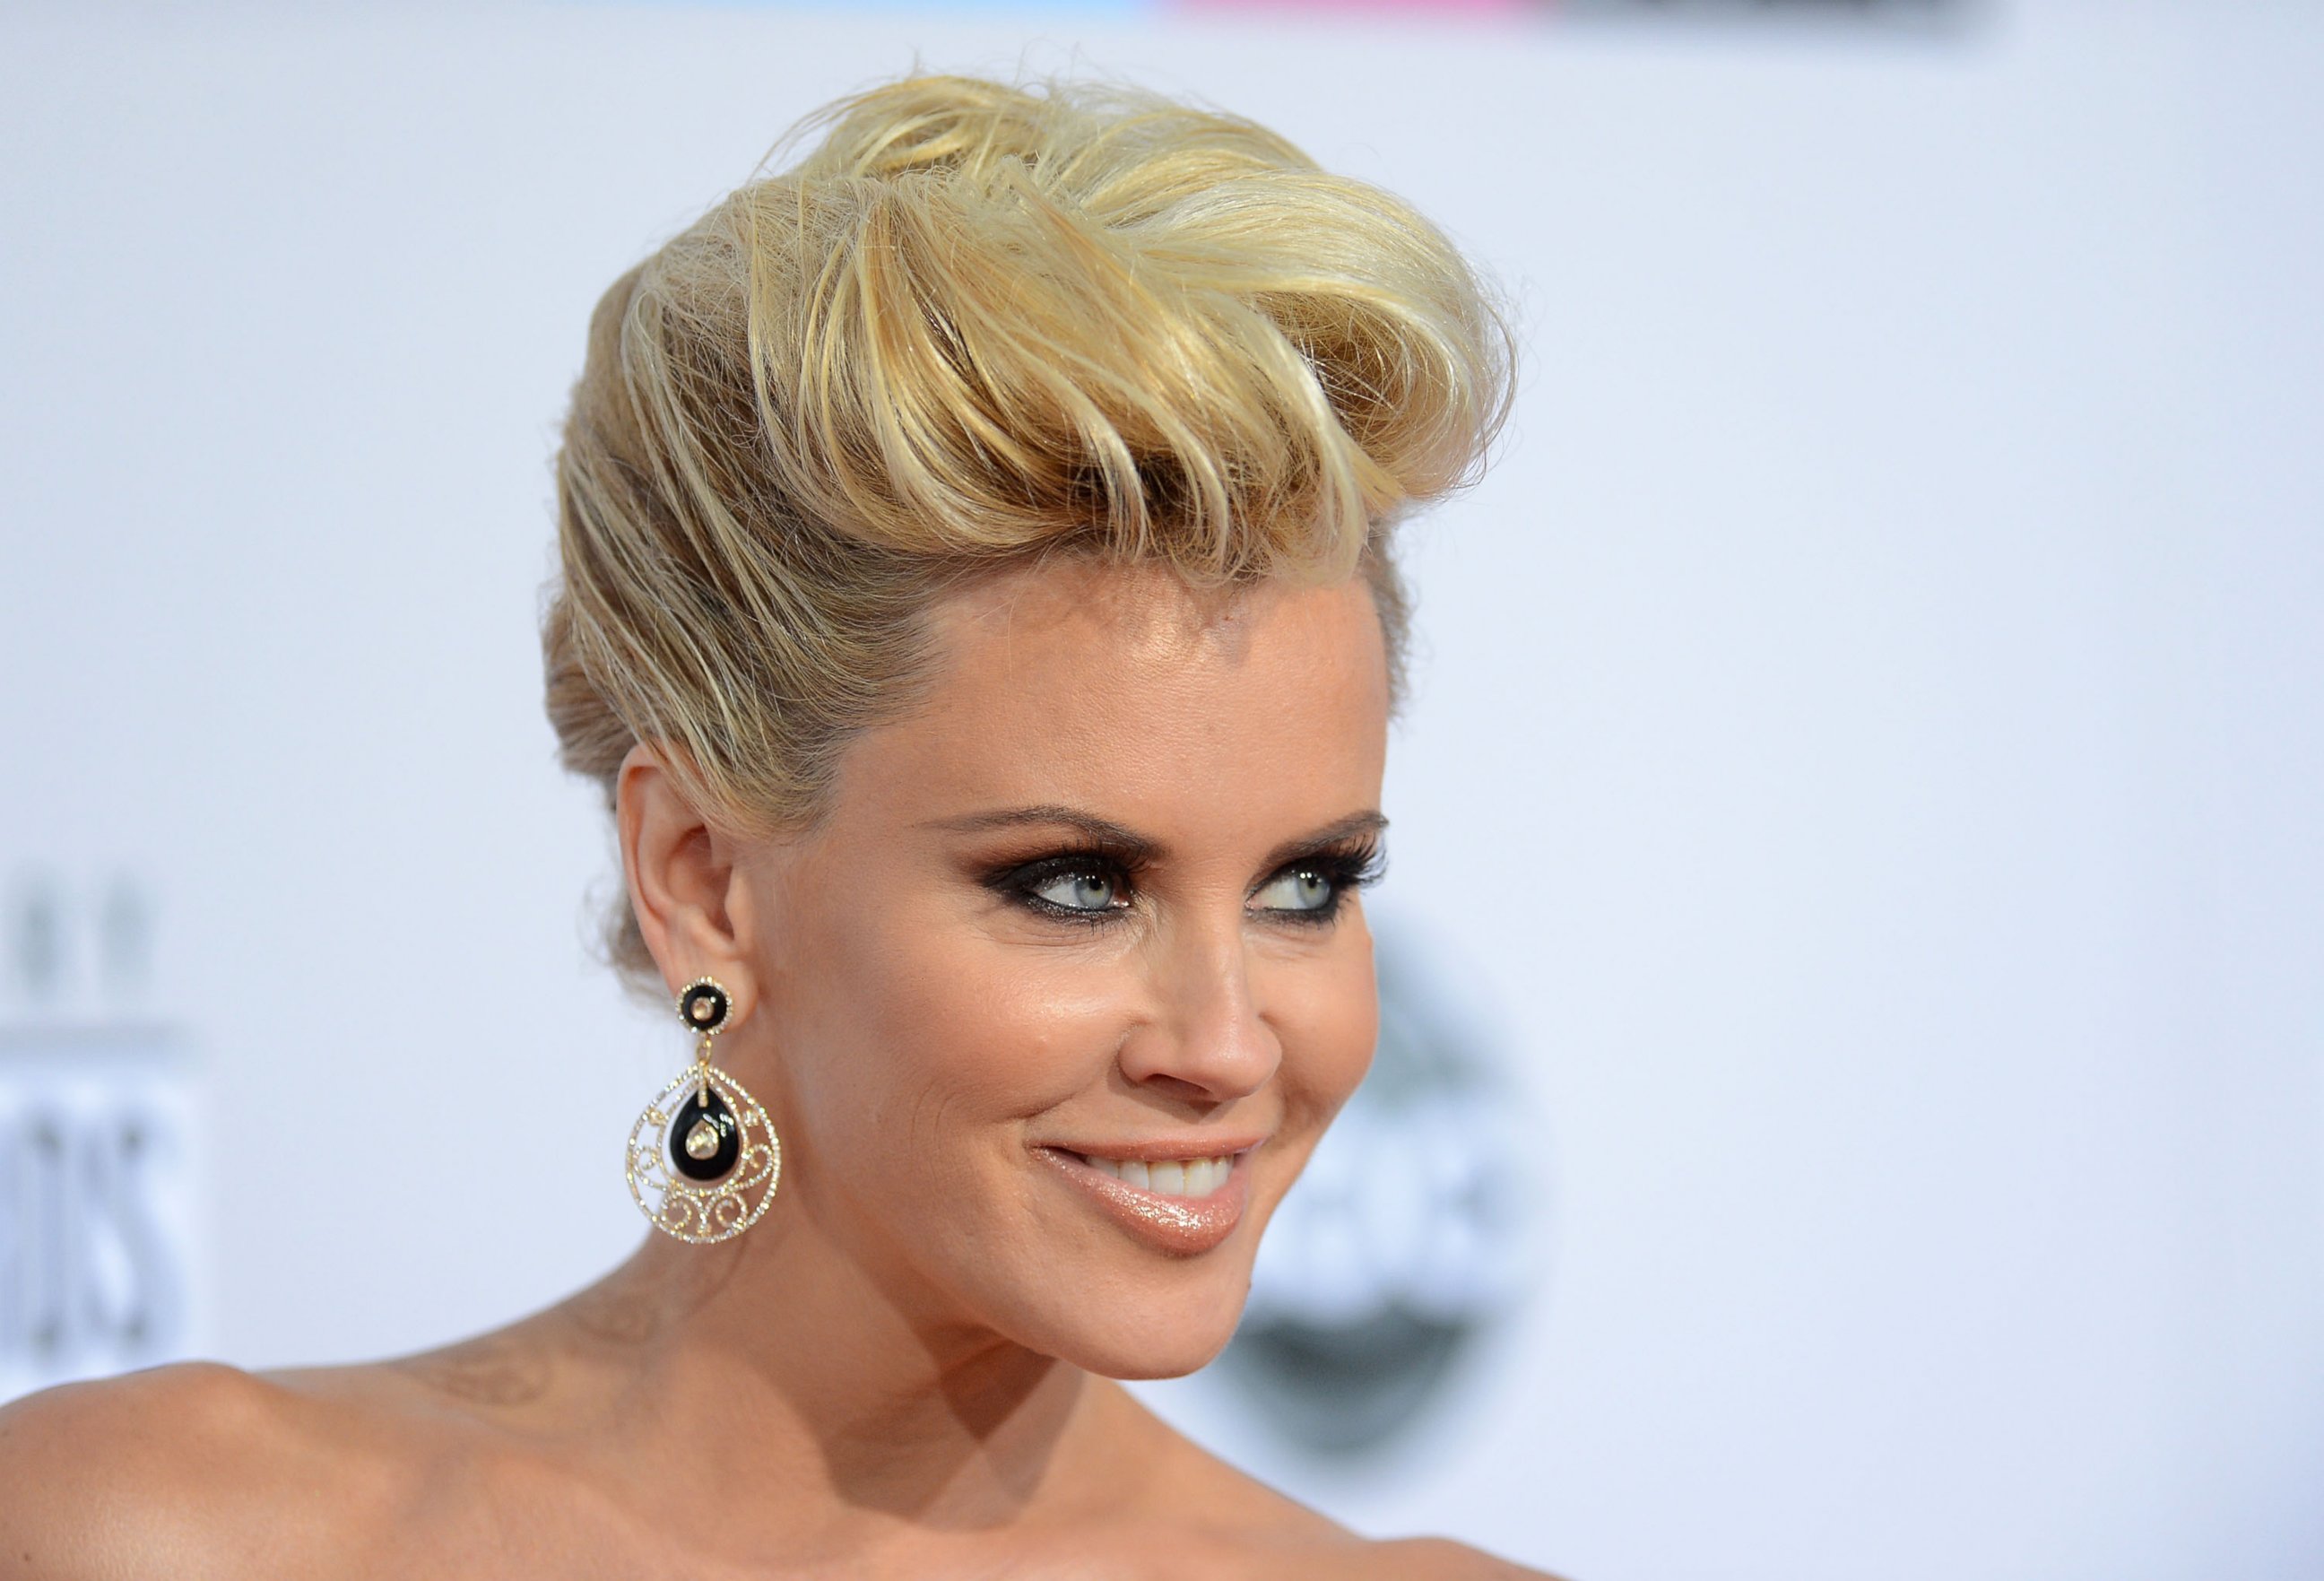 PHOTO: Jenny McCarthy attends the 40th American Music Awards held at Nokia Theatre L.A. Live on Nov. 18, 2012 in Los Angeles.